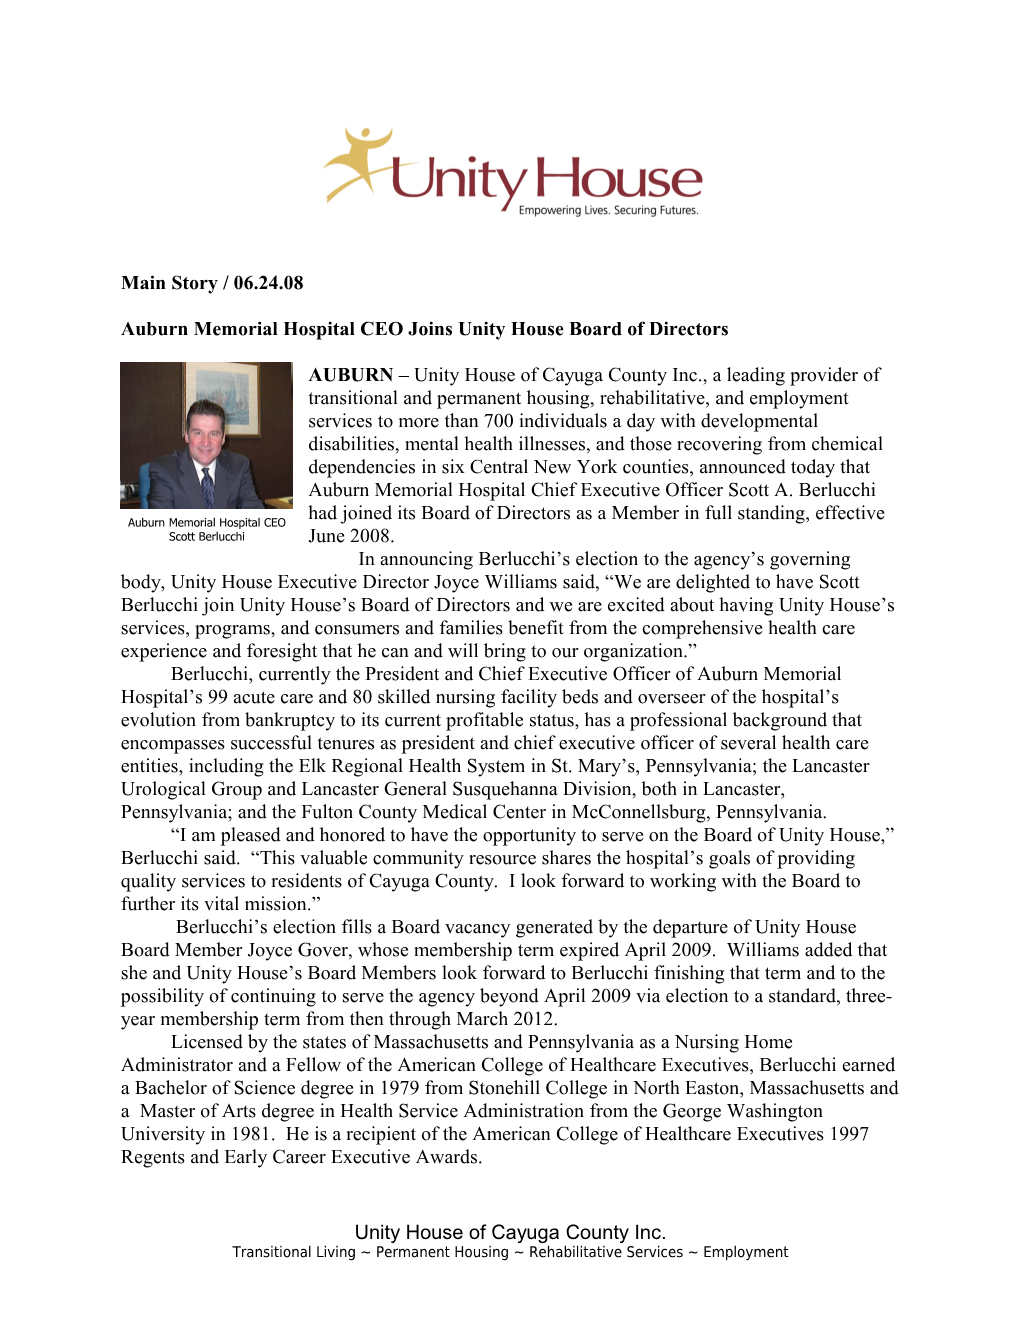 Auburnmemorialhospital CEO Joins Unity House Board of Directors